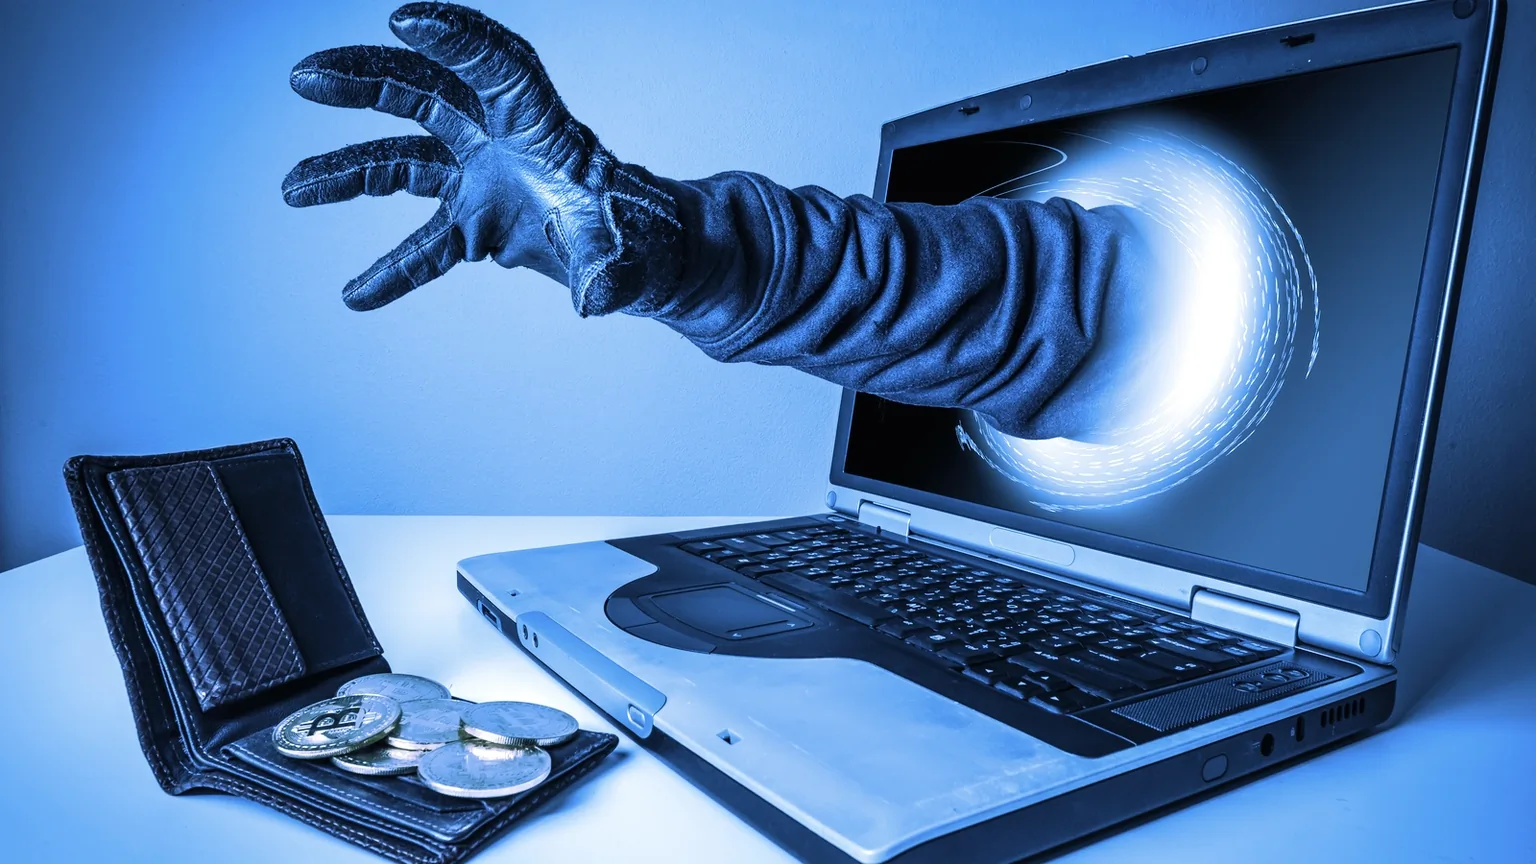 Hacks and exploits are common in the crypto world. Image: Shutterstock